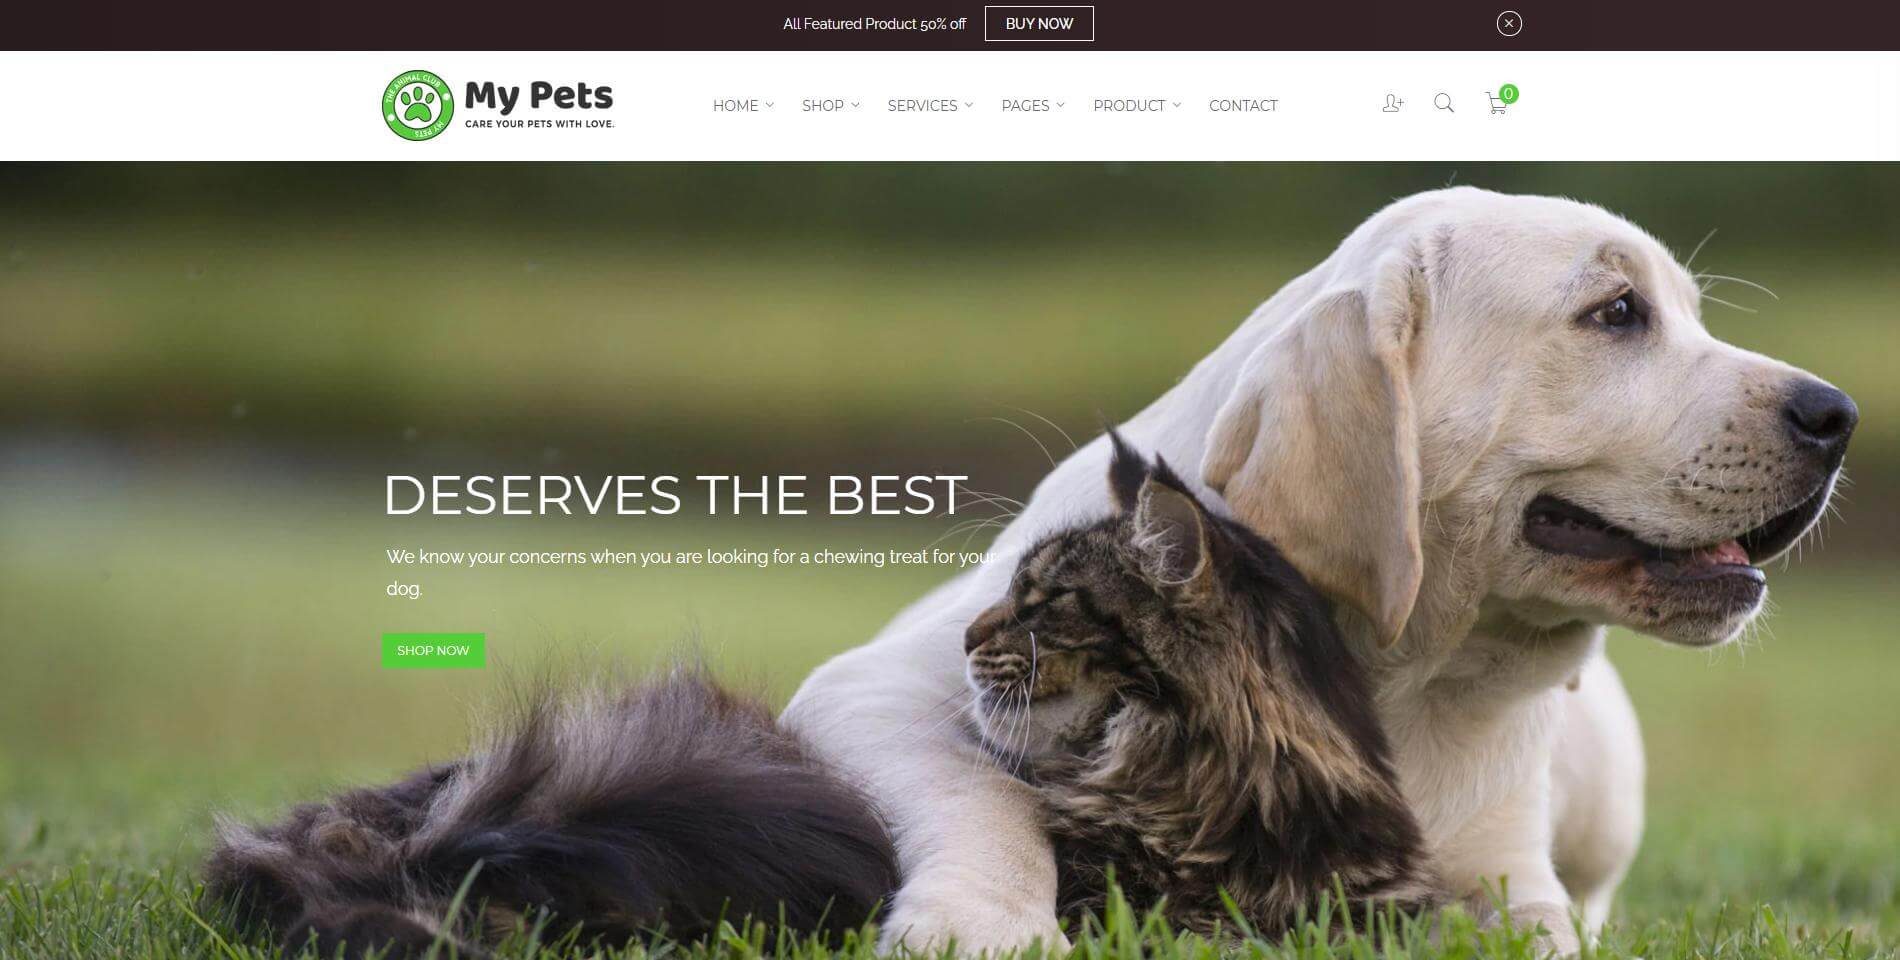 Want a sleek & minimalistic theme for your pet store? Write My Pets on top of your list